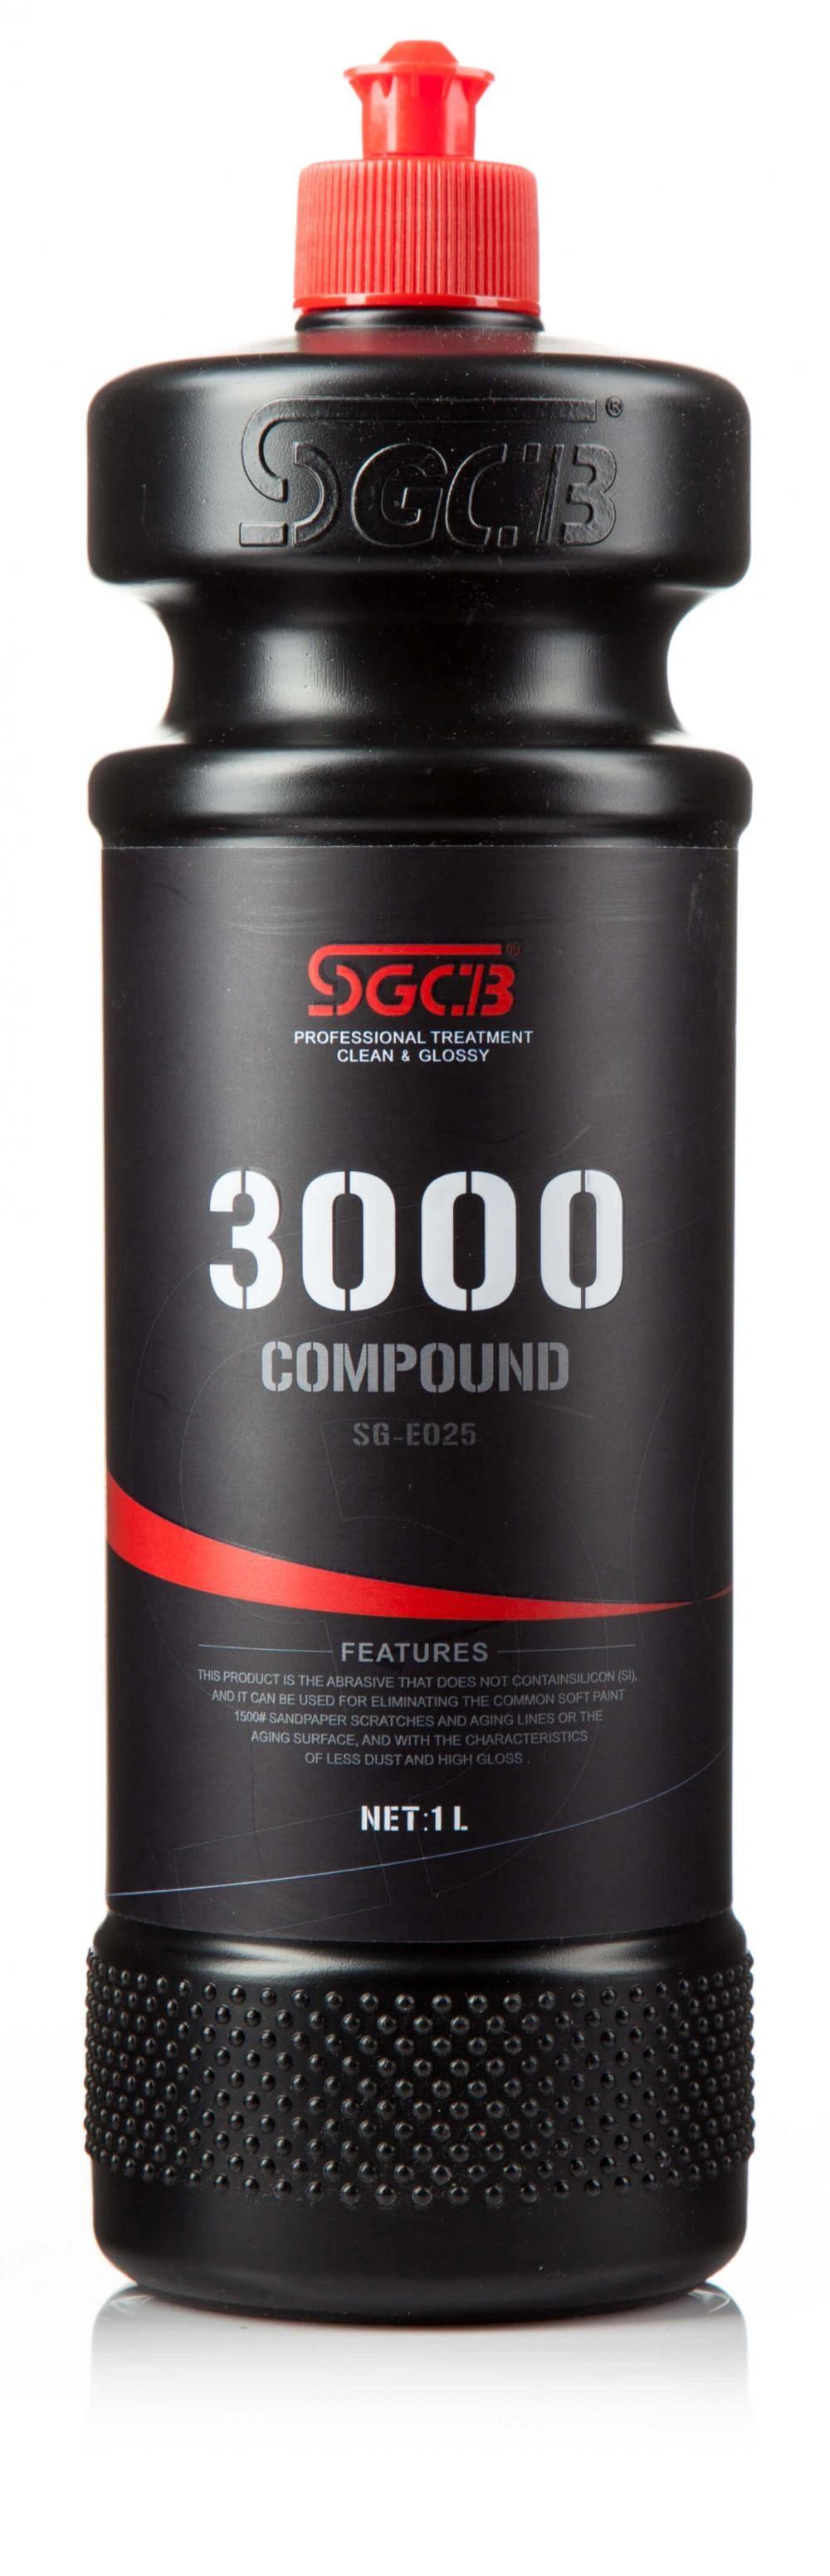 S500 Perfect Fast Cut Rubbing Compound Heavy Cutting Compound Polish With  Strong Abrasion - SYBON Professional Car Paint Manufacturer in China